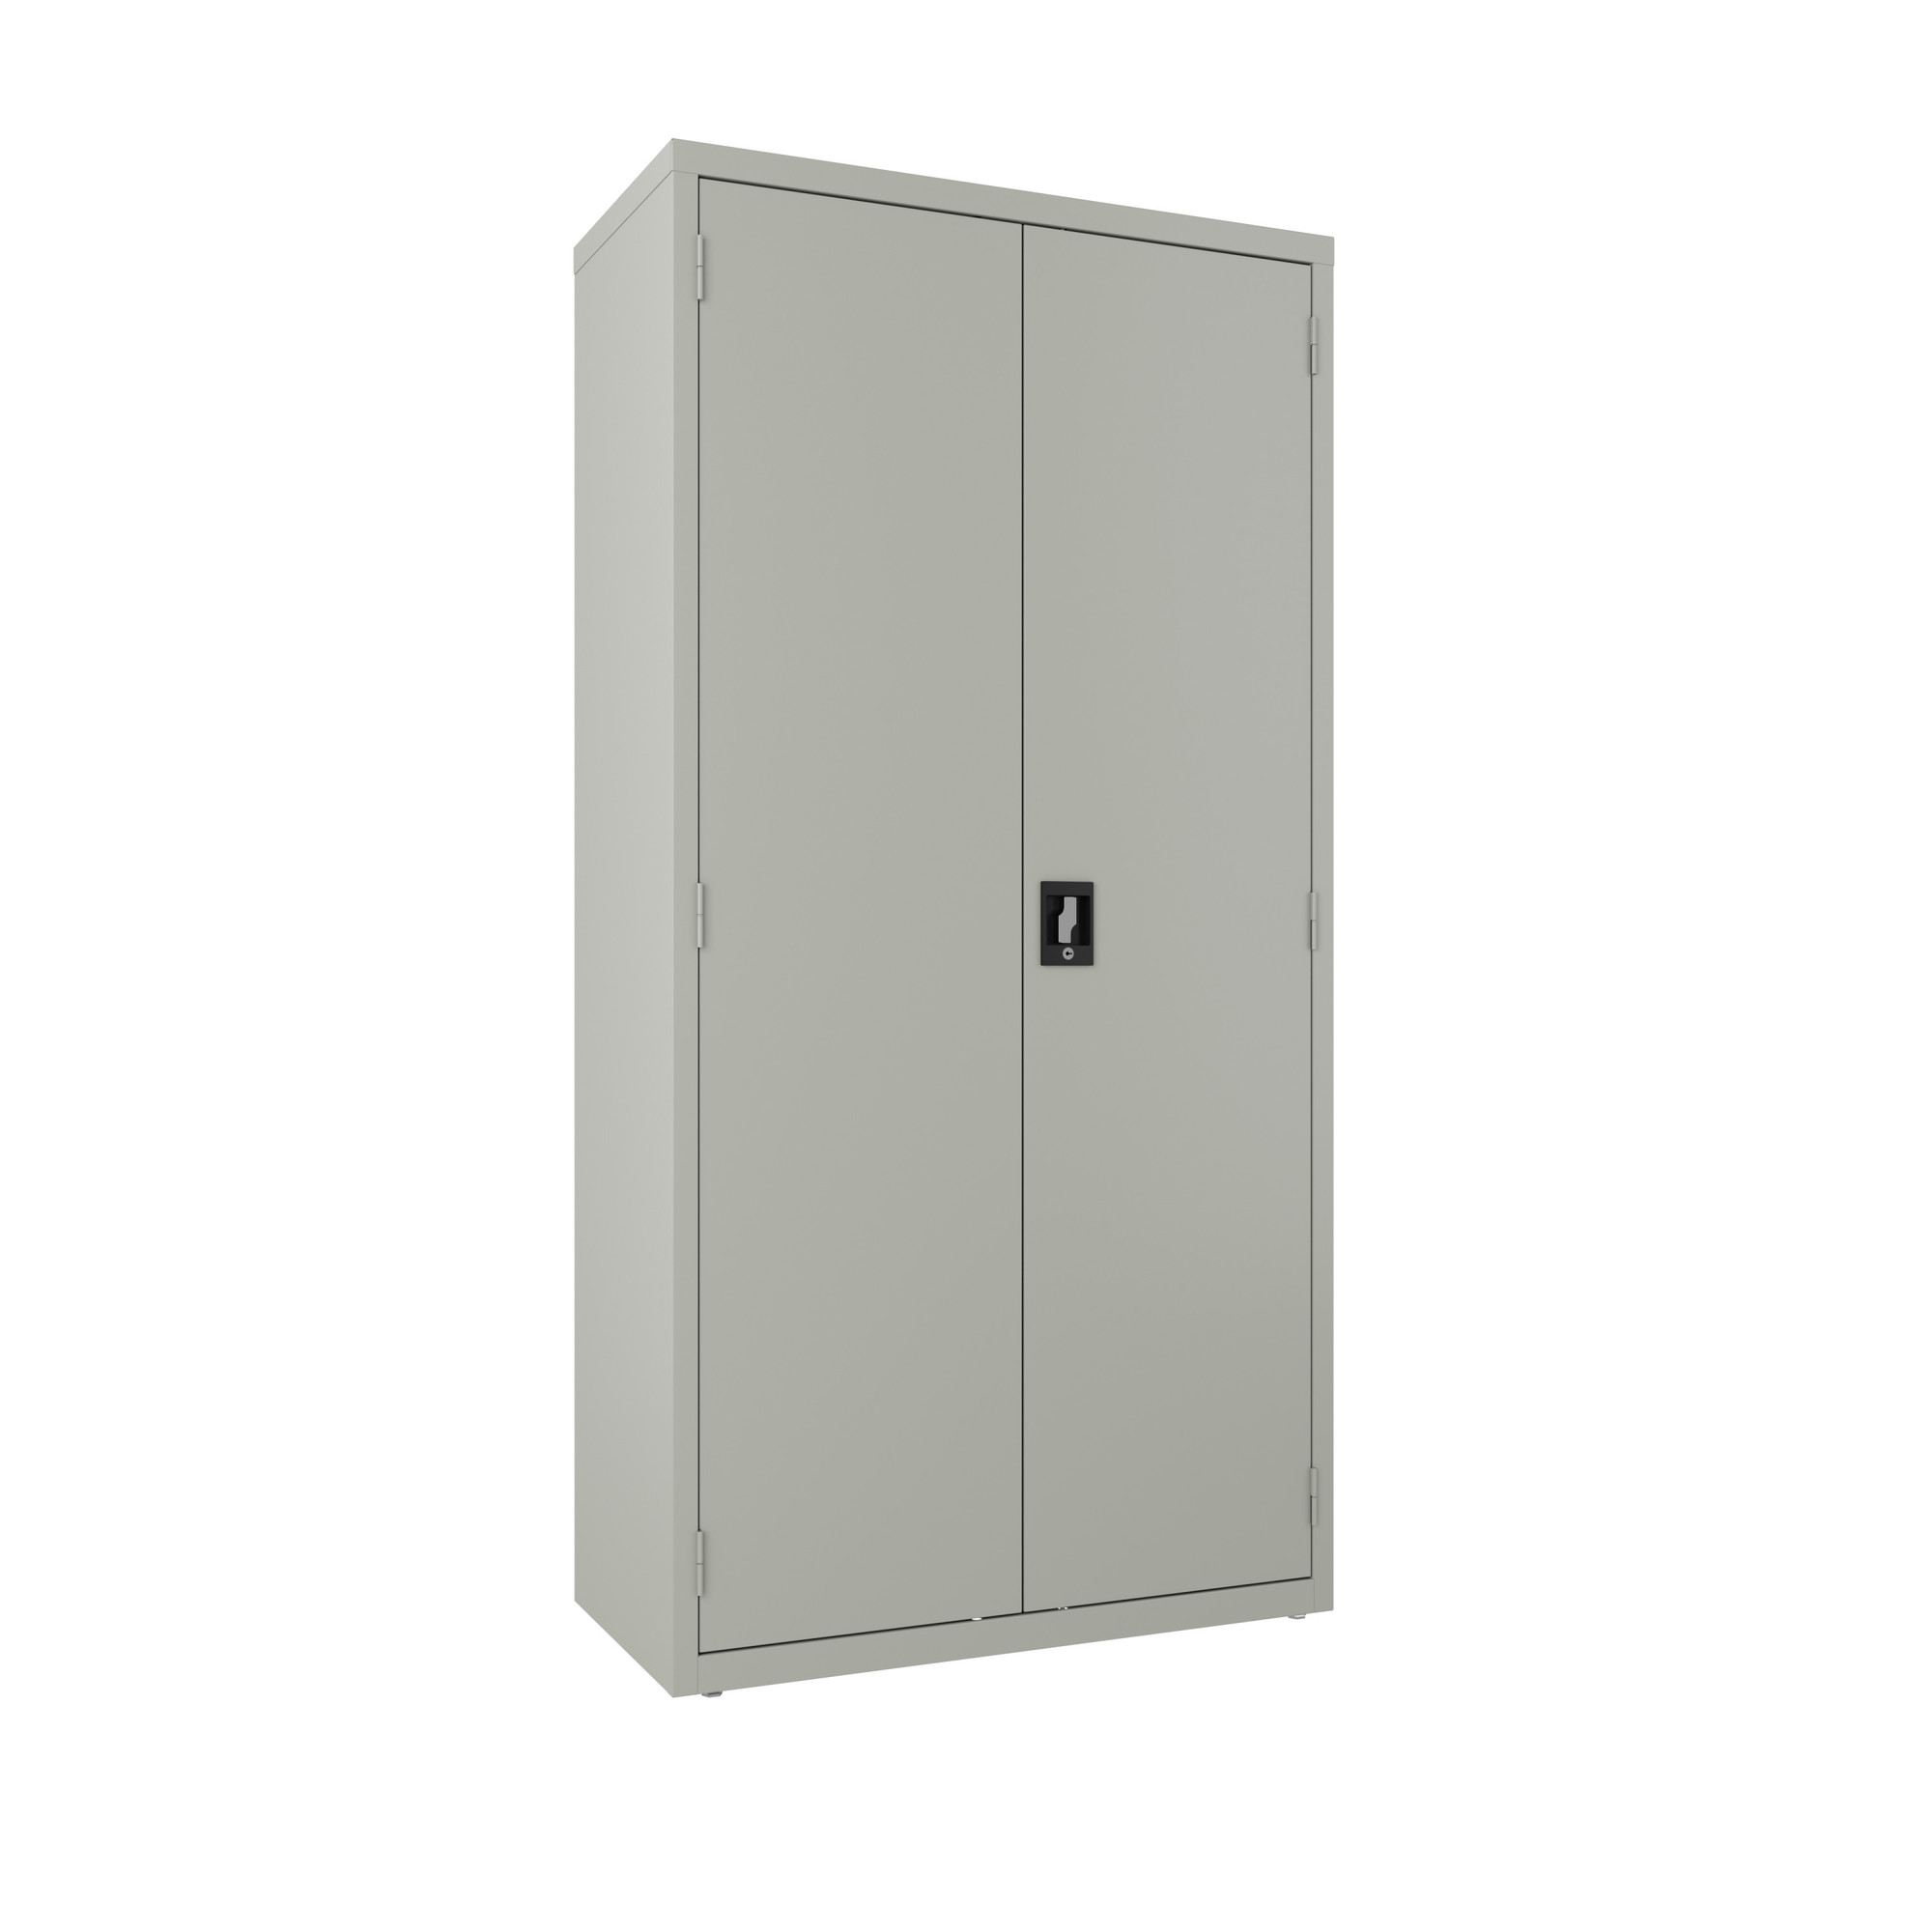 Hirsh Industries, Janitorial Cabinet, Height 72 in, Width 36 in, Color Gray, Model 24034